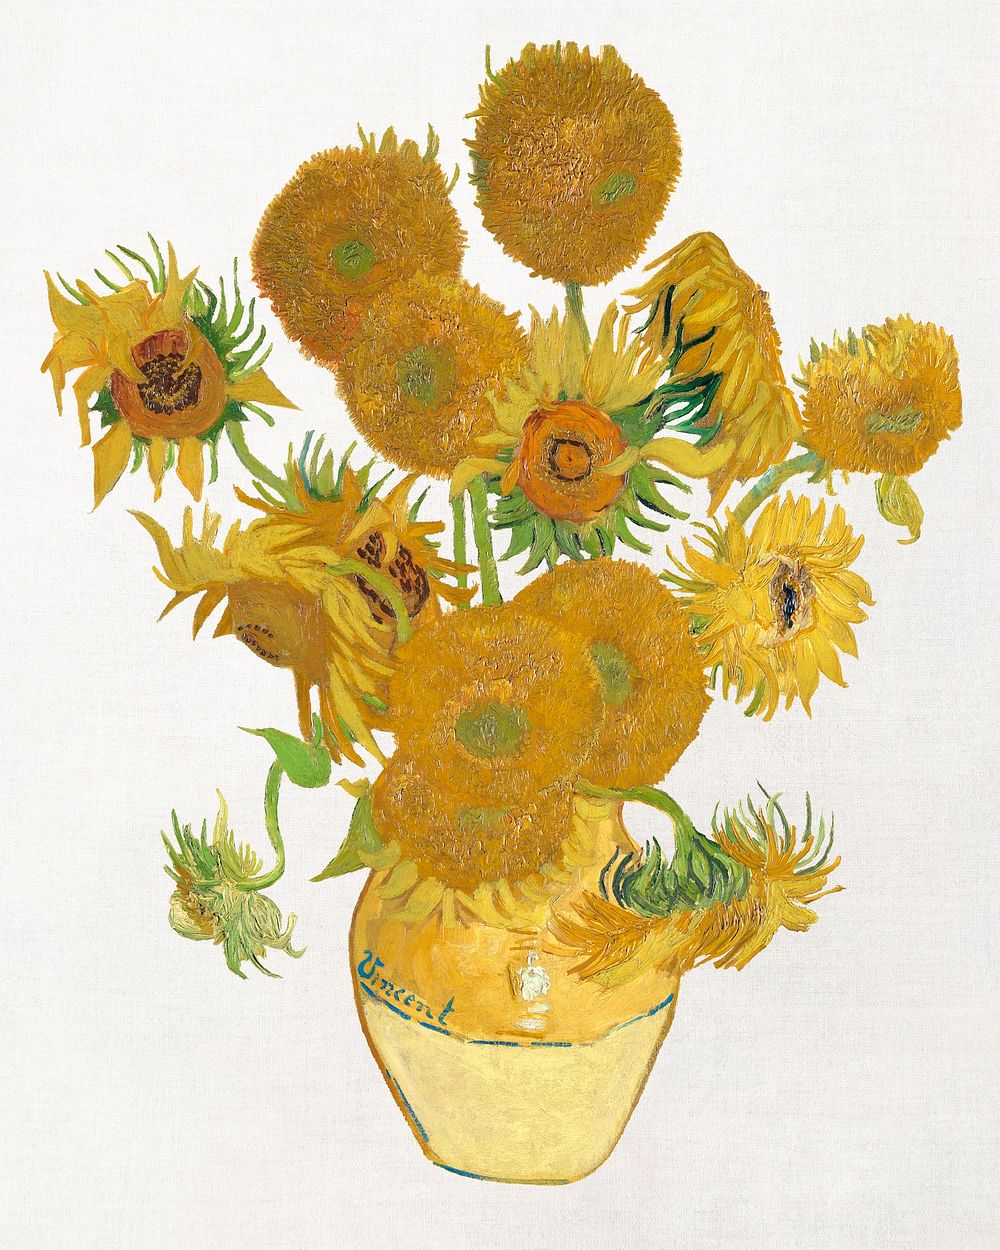 Van Gogh&rsquo;s Sunflowers illustration, famous artwork painting, remastered by rawpixel